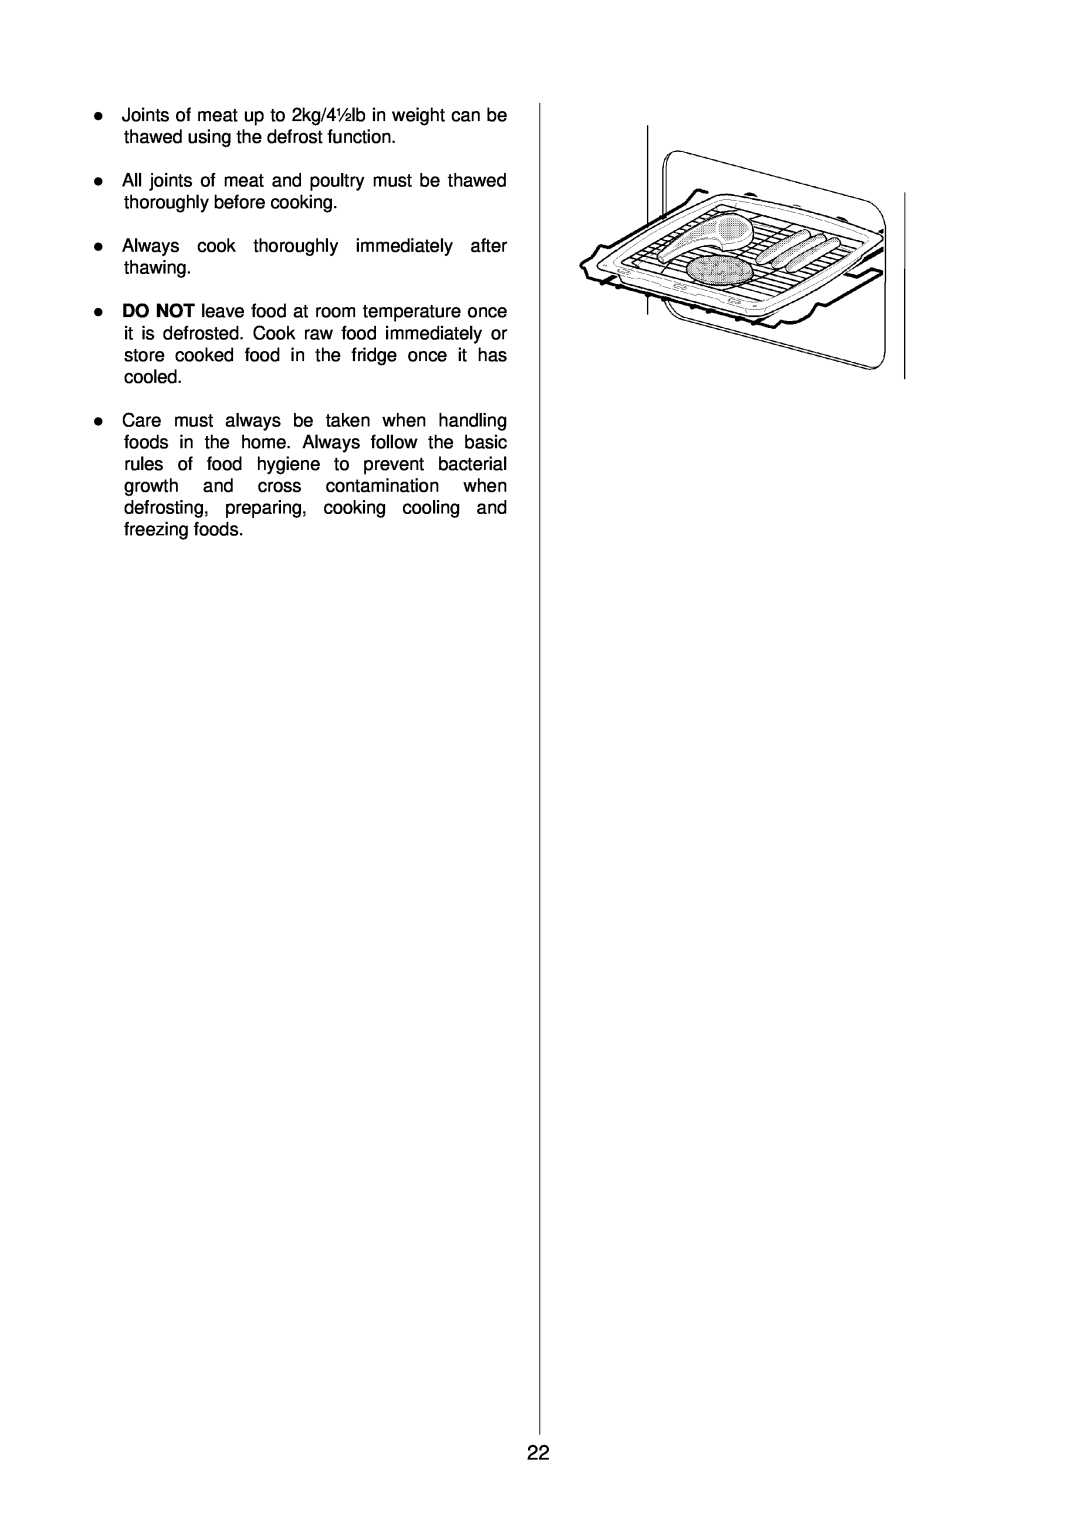 Electrolux D2160-1 operating instructions Always cook thoroughly immediately after thawing, l cooled 